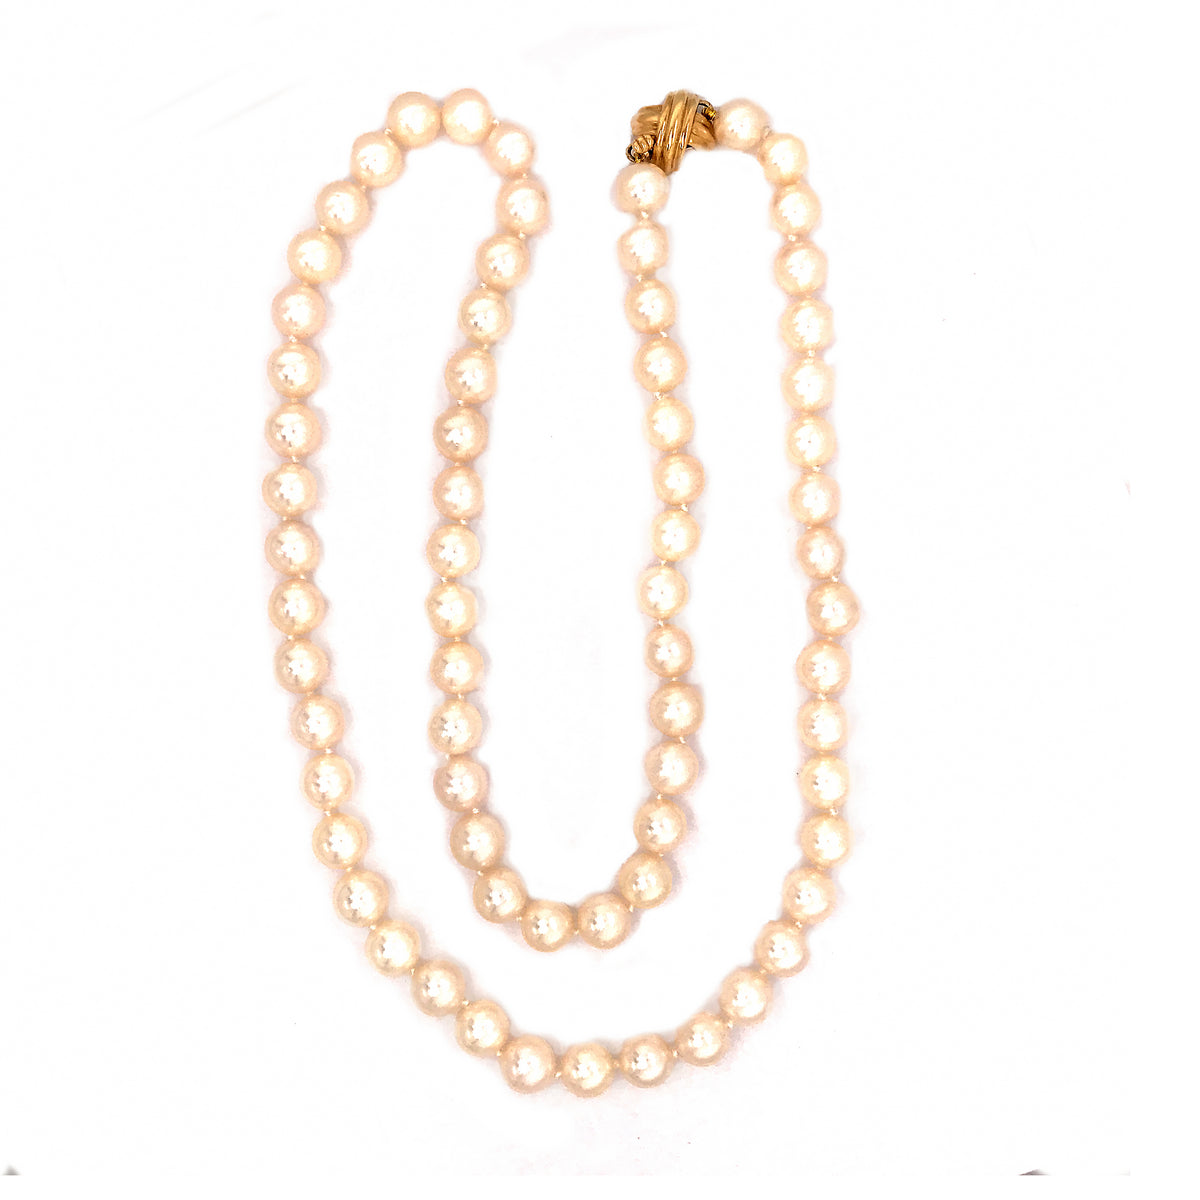 Sold at Auction: Possibly Tiffany & Co 18K Rabbit & Pearl Necklace